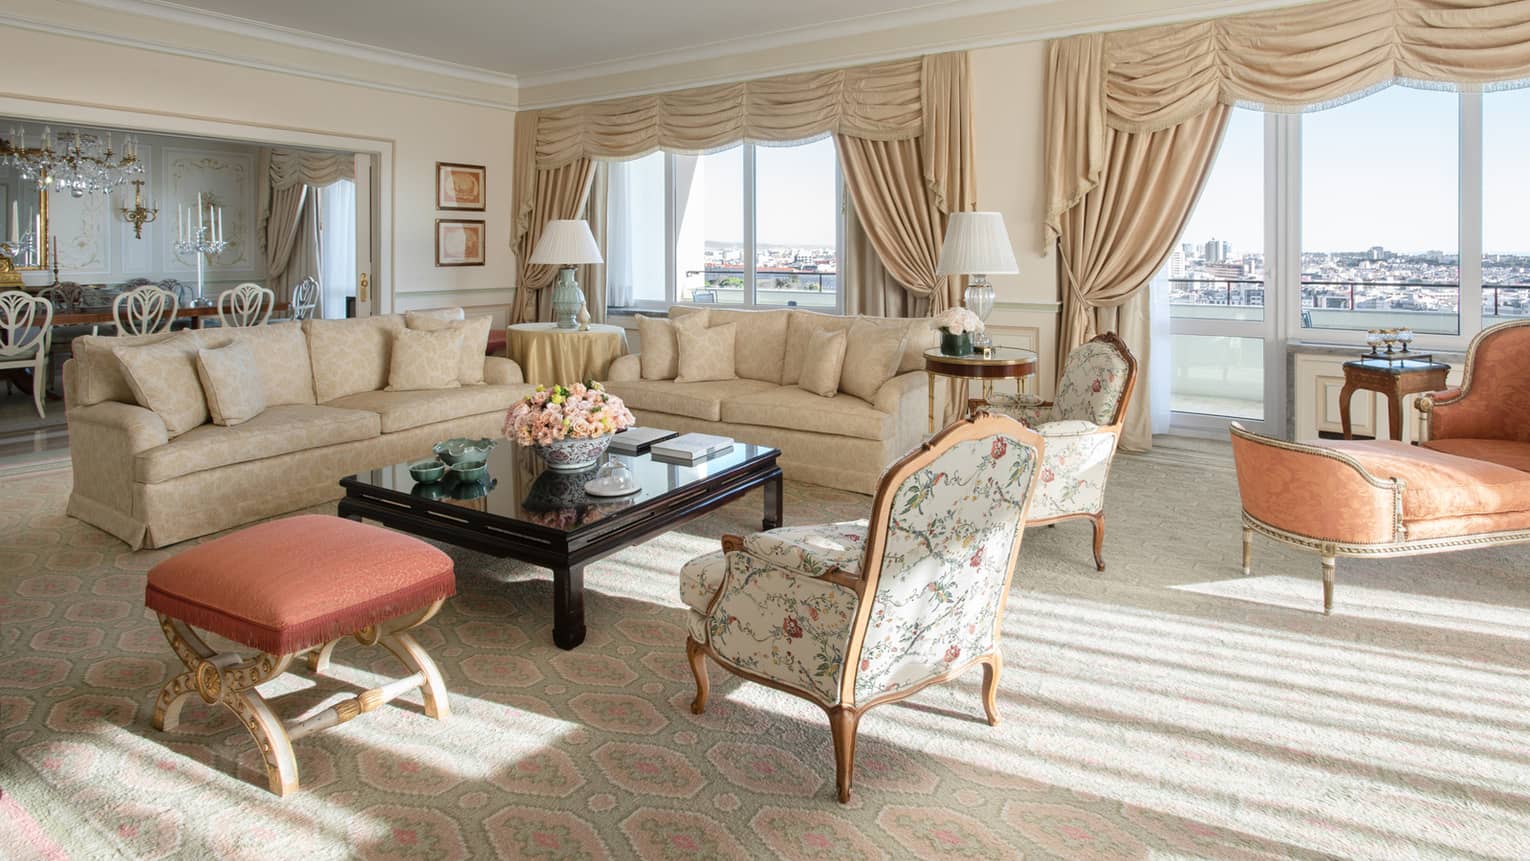 Presidential suite with two beige sofas, wing chairs, ottoman, orange chaise, tall windows with views